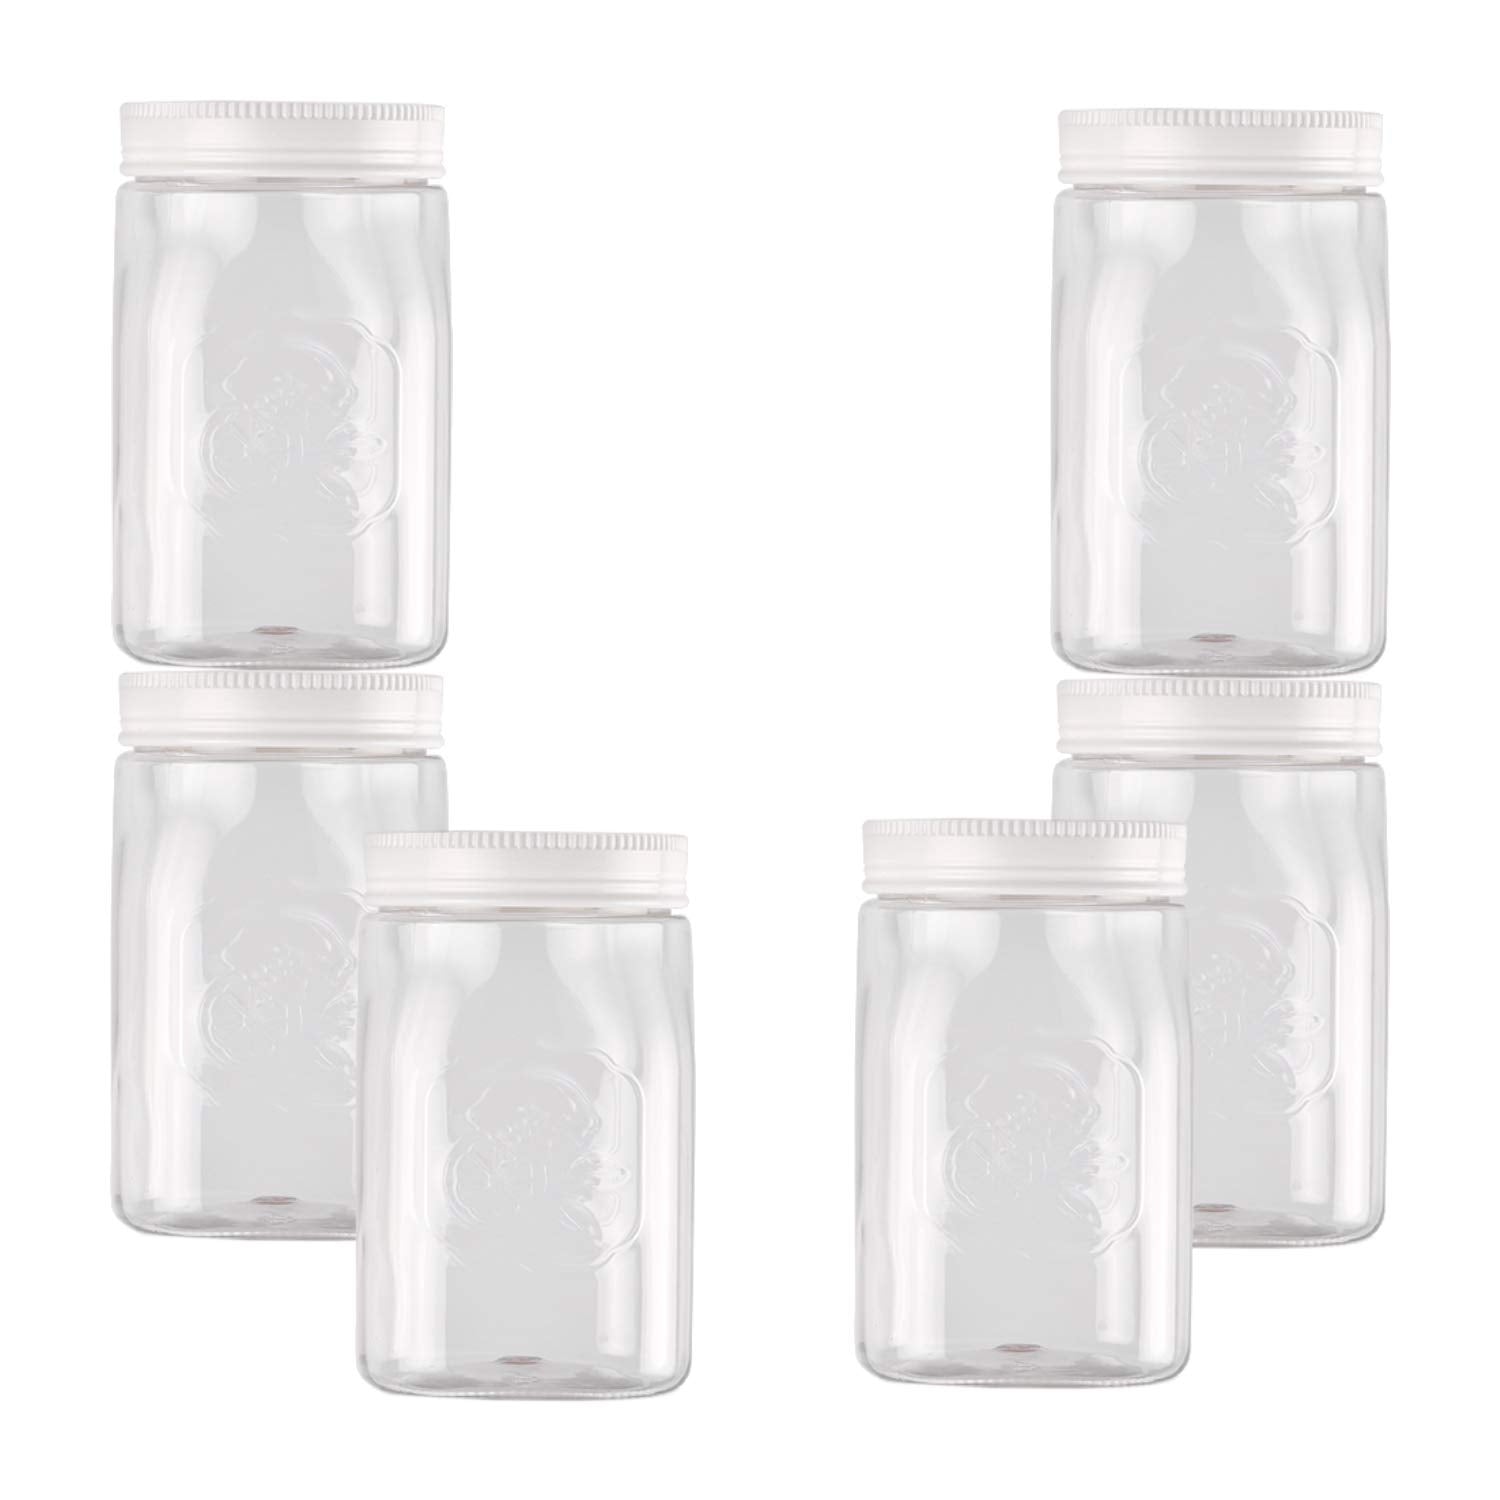 CELLO Fridge Door Canister | 100% Food Grade & BPA Free Airtight containers | Elegant and durable with easy to open lids | 1000ml, Set of 6 | White